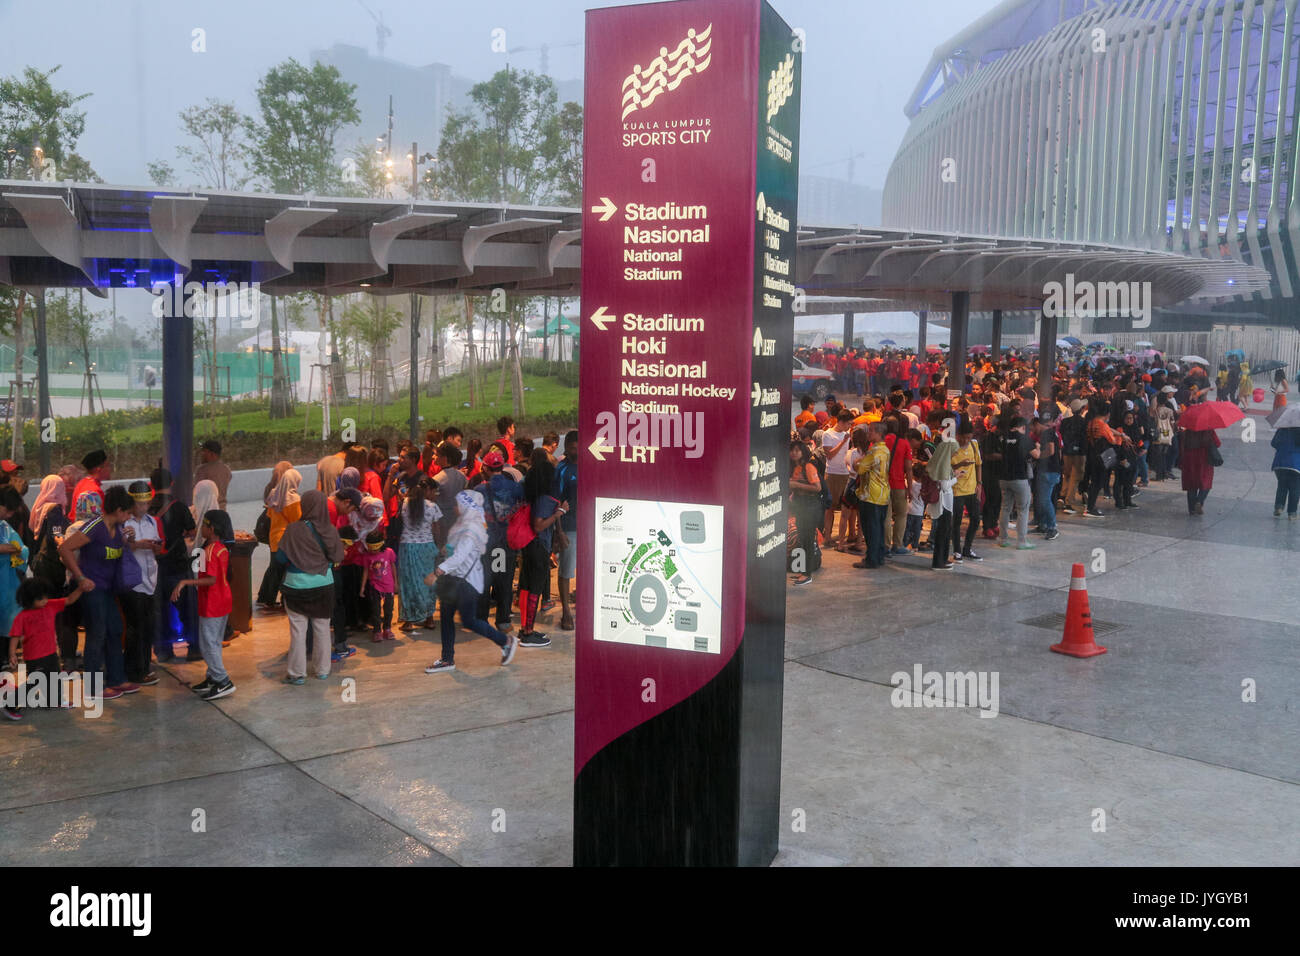 Crowd go under the shade when heavy rain suddenly pour down during the opening ceremony of 29th SEA games. Credit: Calvin Chan/Alamy Live News Stock Photo